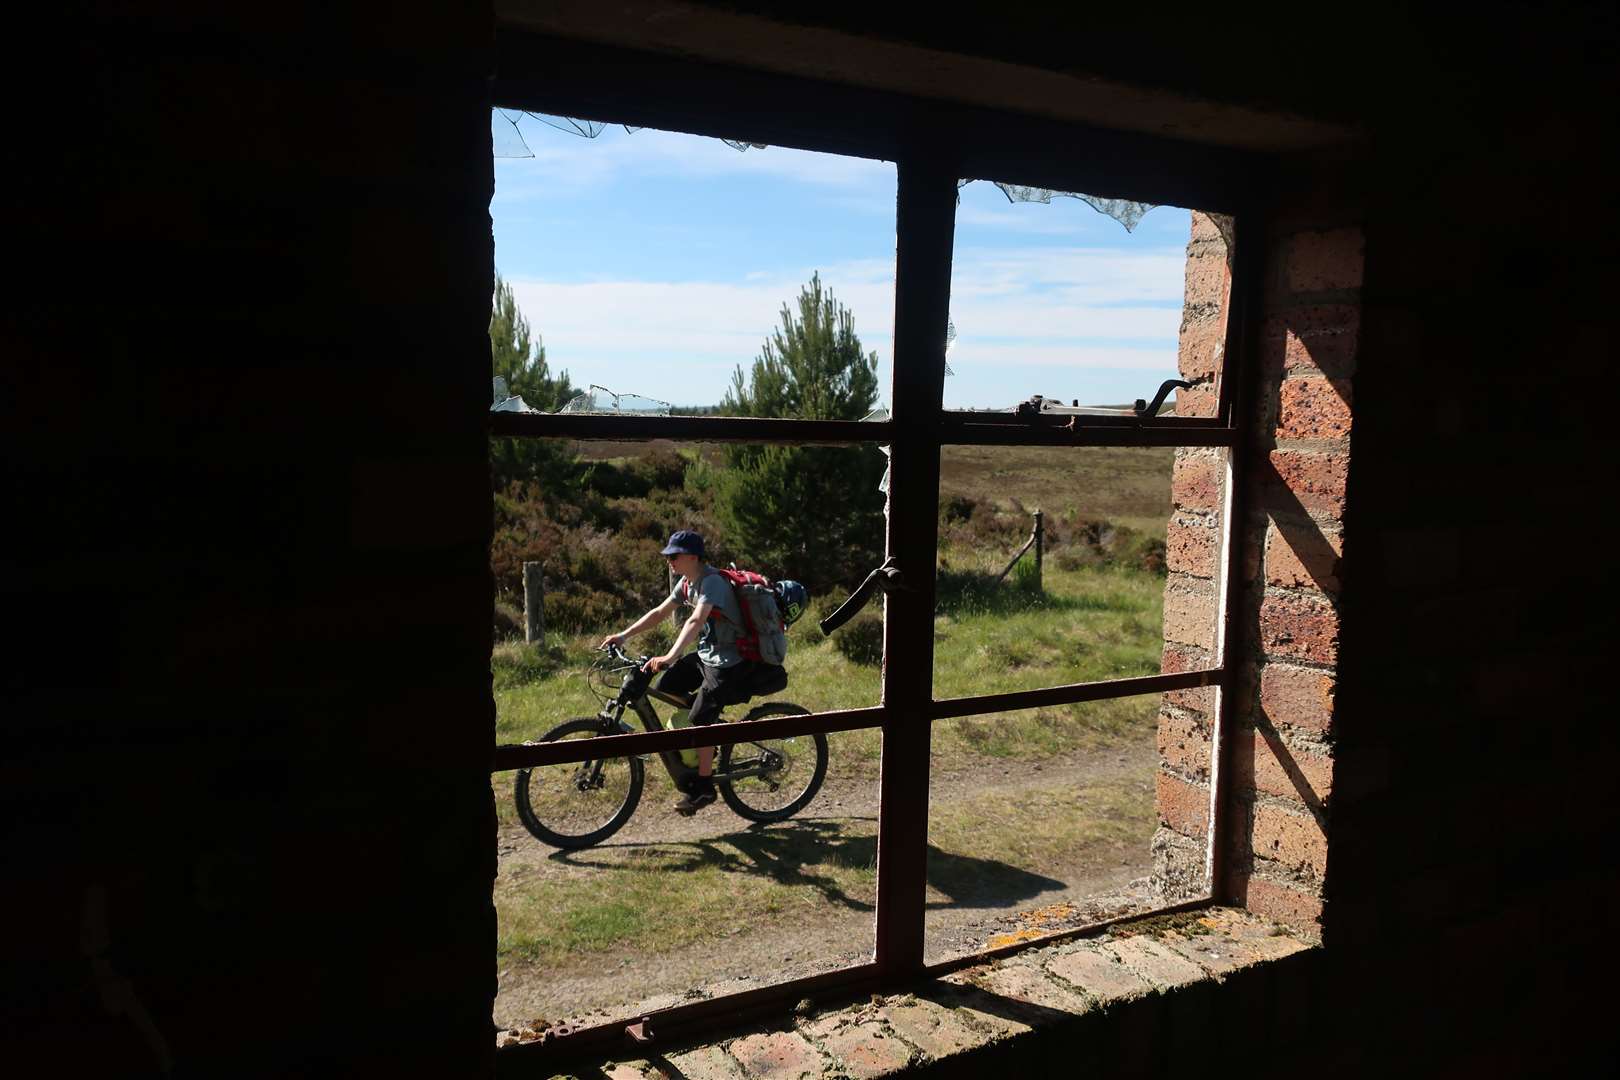 Eoghain passing the window of an old building beside the former railway line.